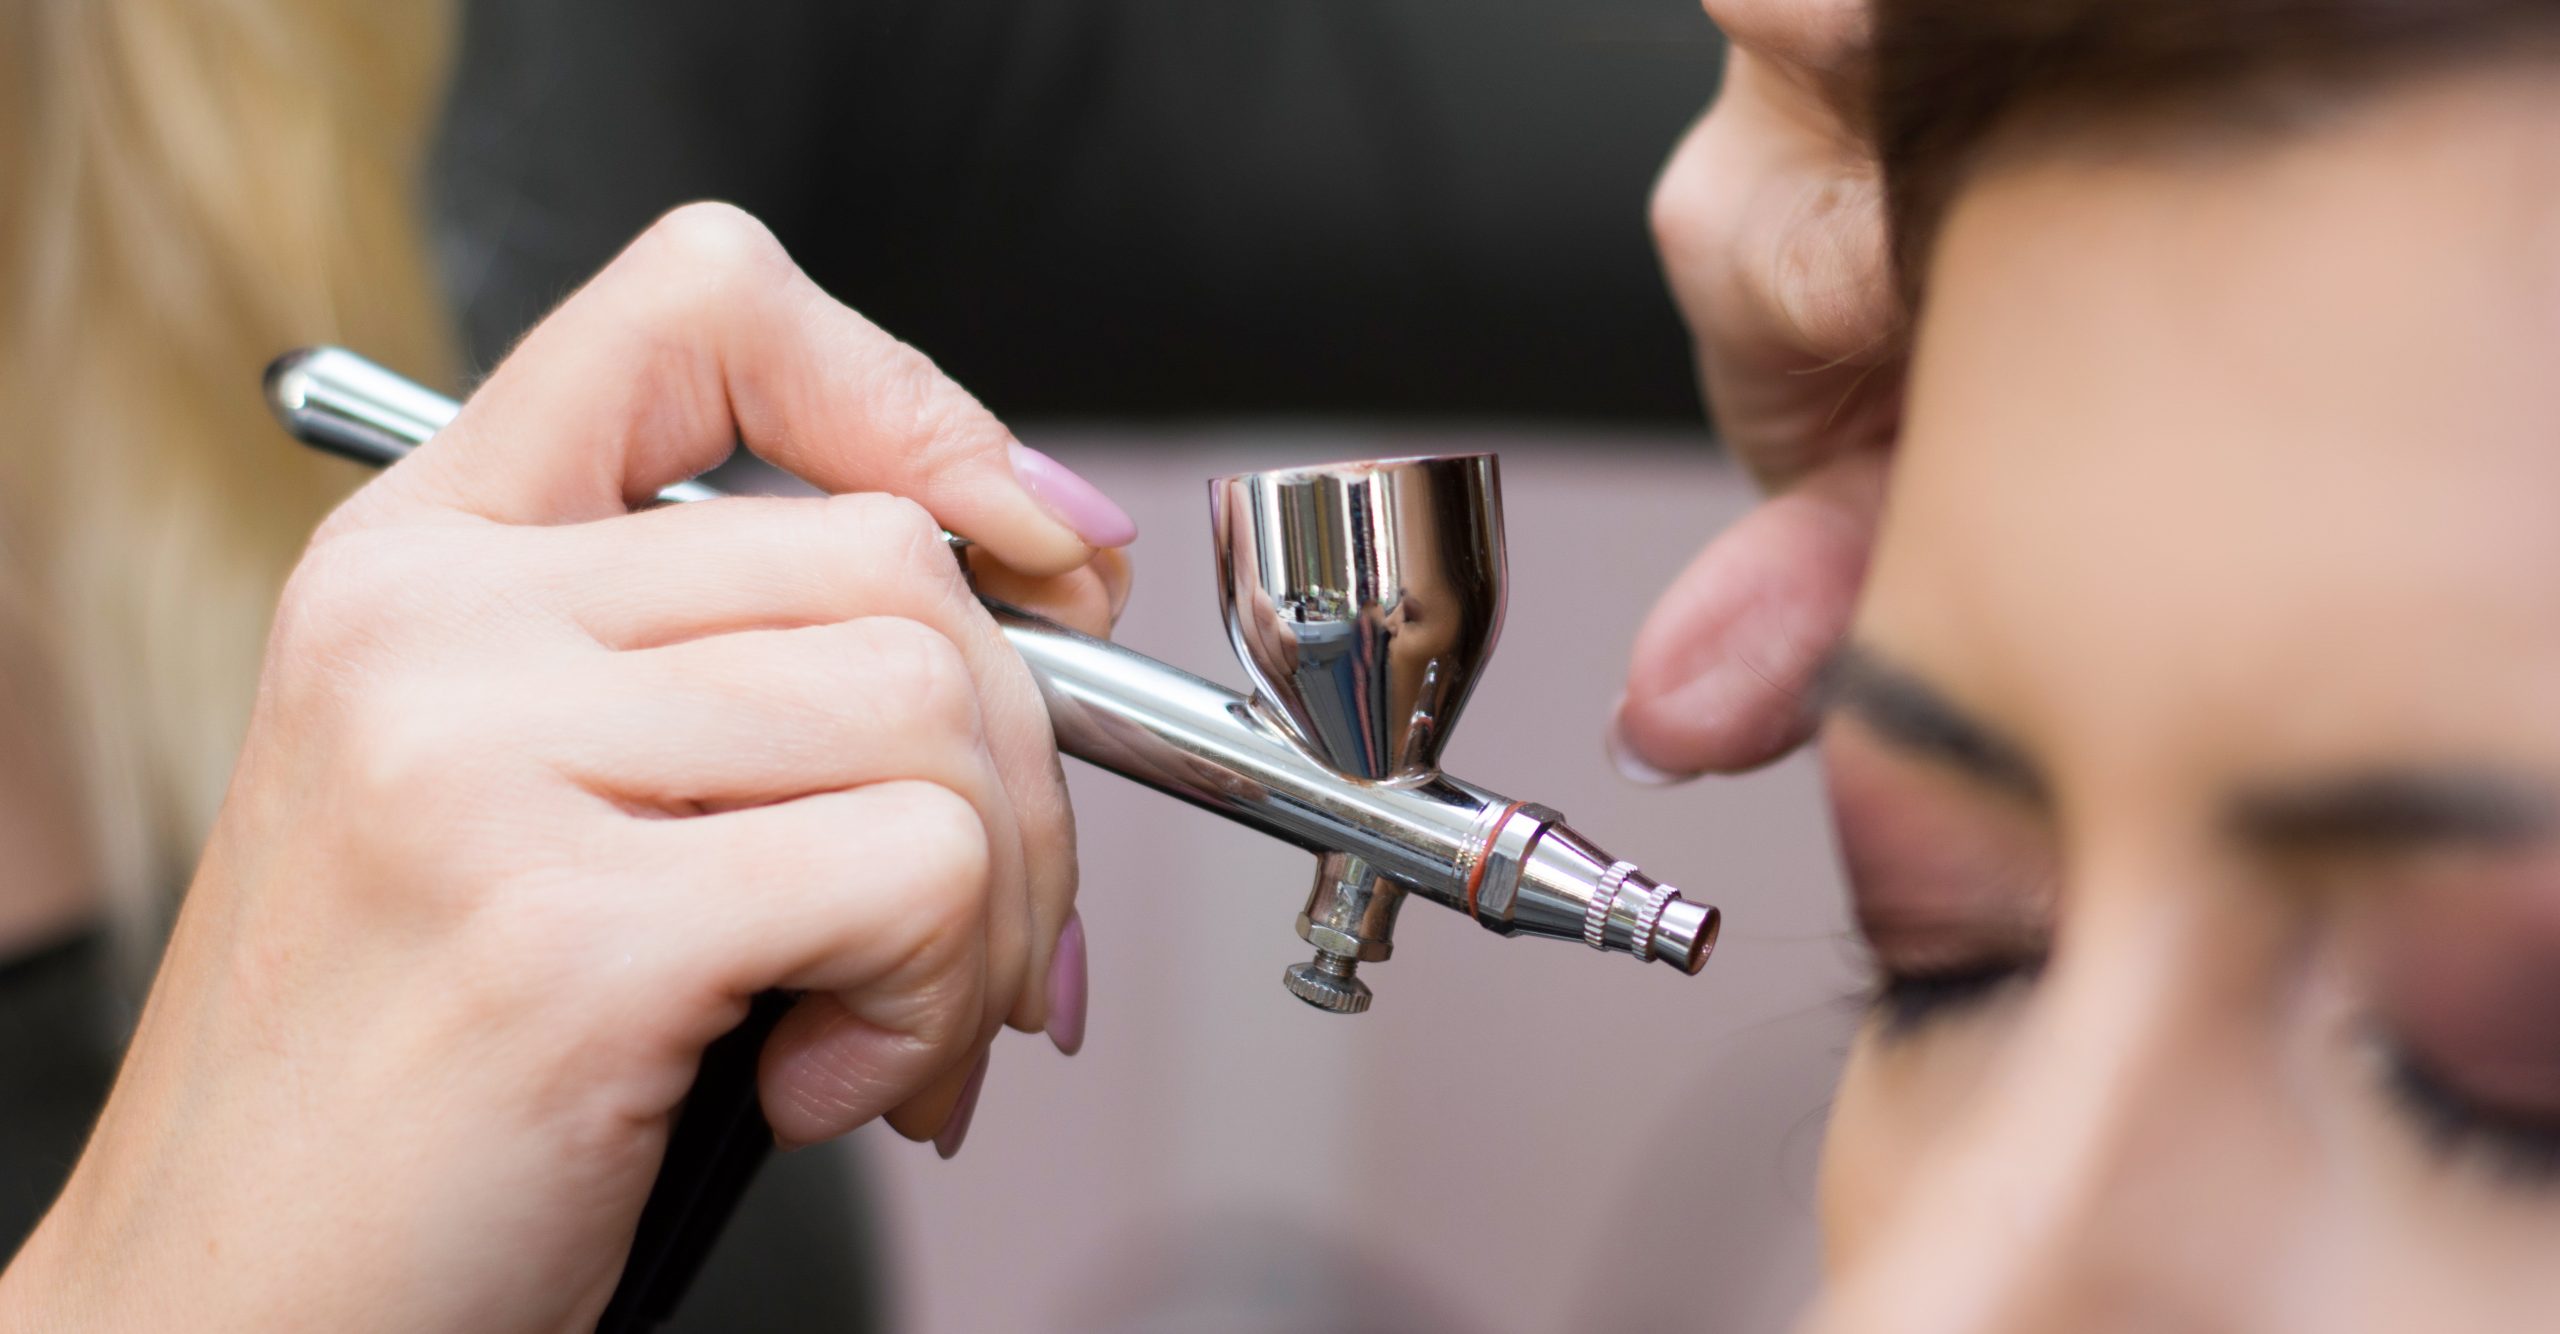 All You Need to Know About Airbrush Makeup - Orane International School